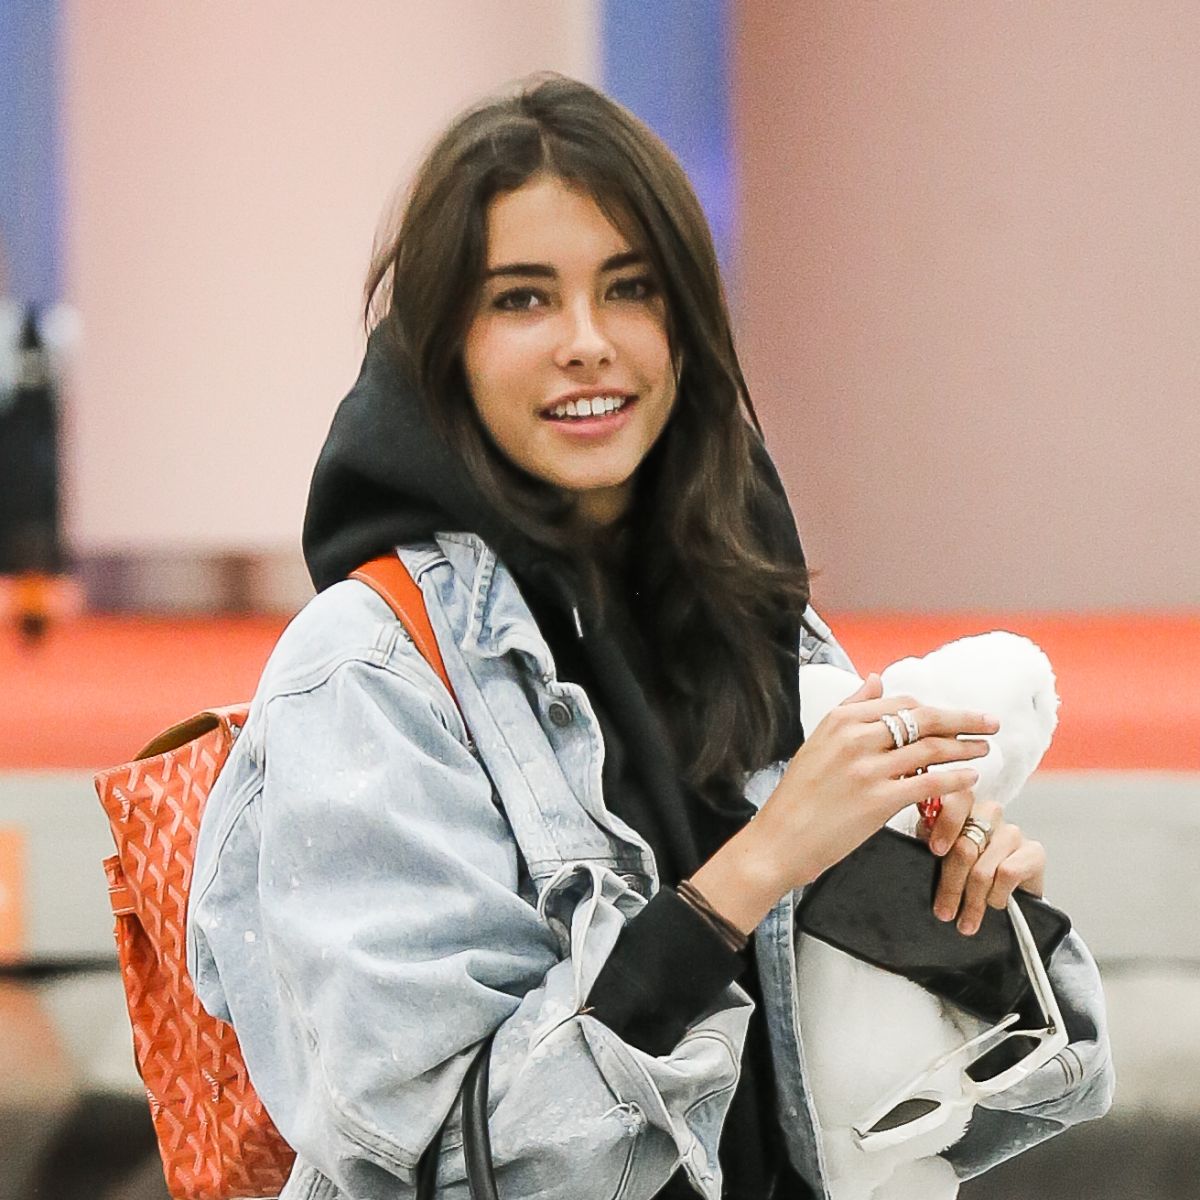 MADISON BEER at JFK Airport in New York 07/26/2017 – HawtCelebs